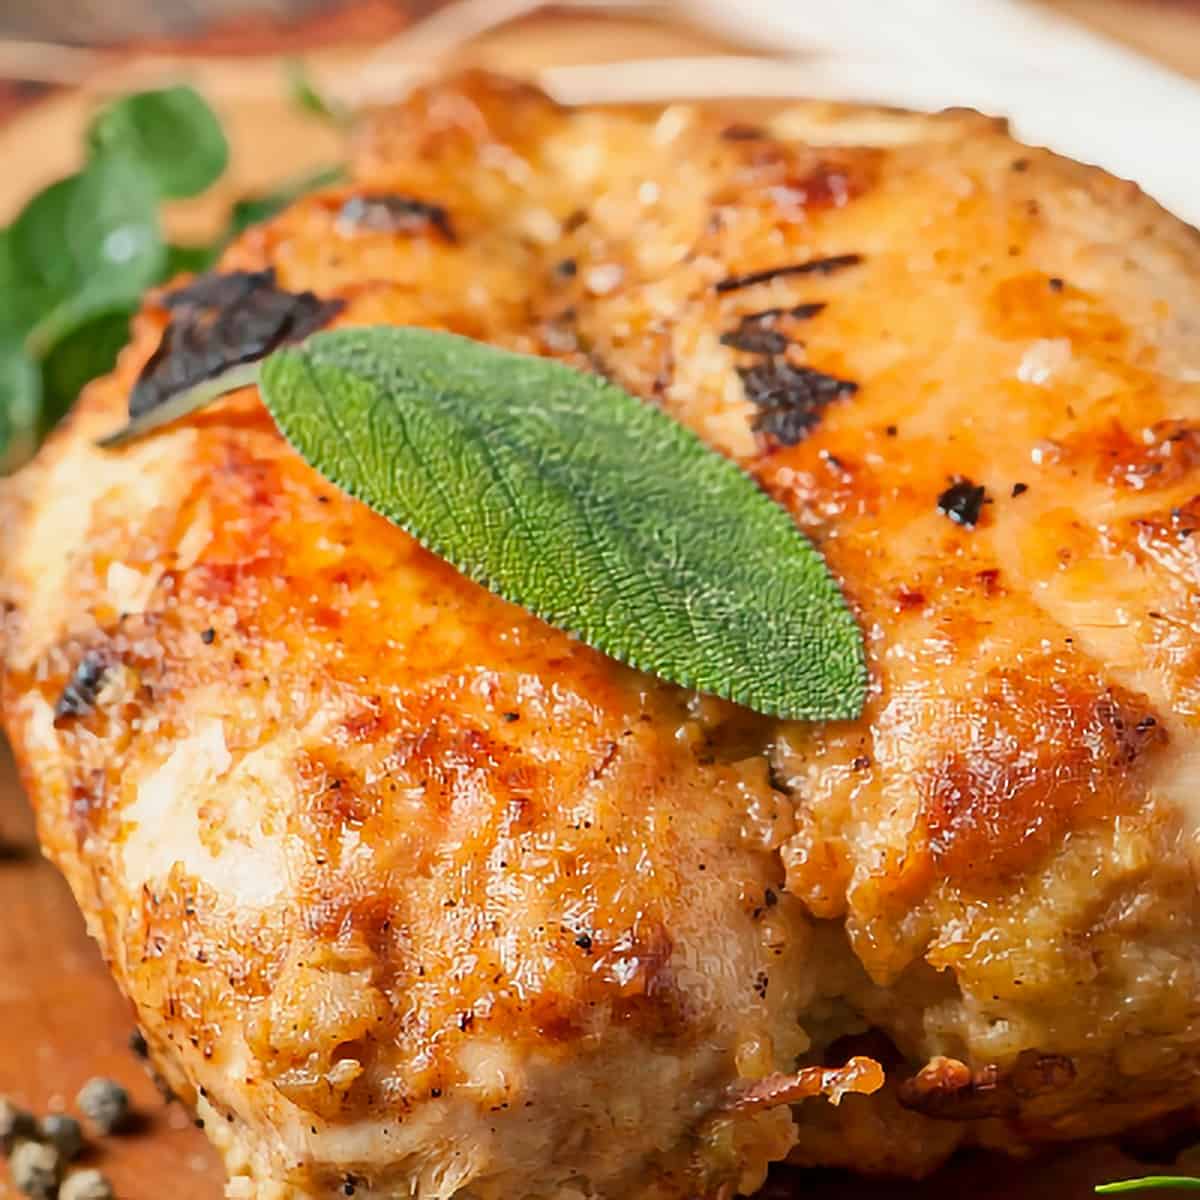 8. Chicken Breasts Stuffed with Italian Sausage and Breadcrumbs